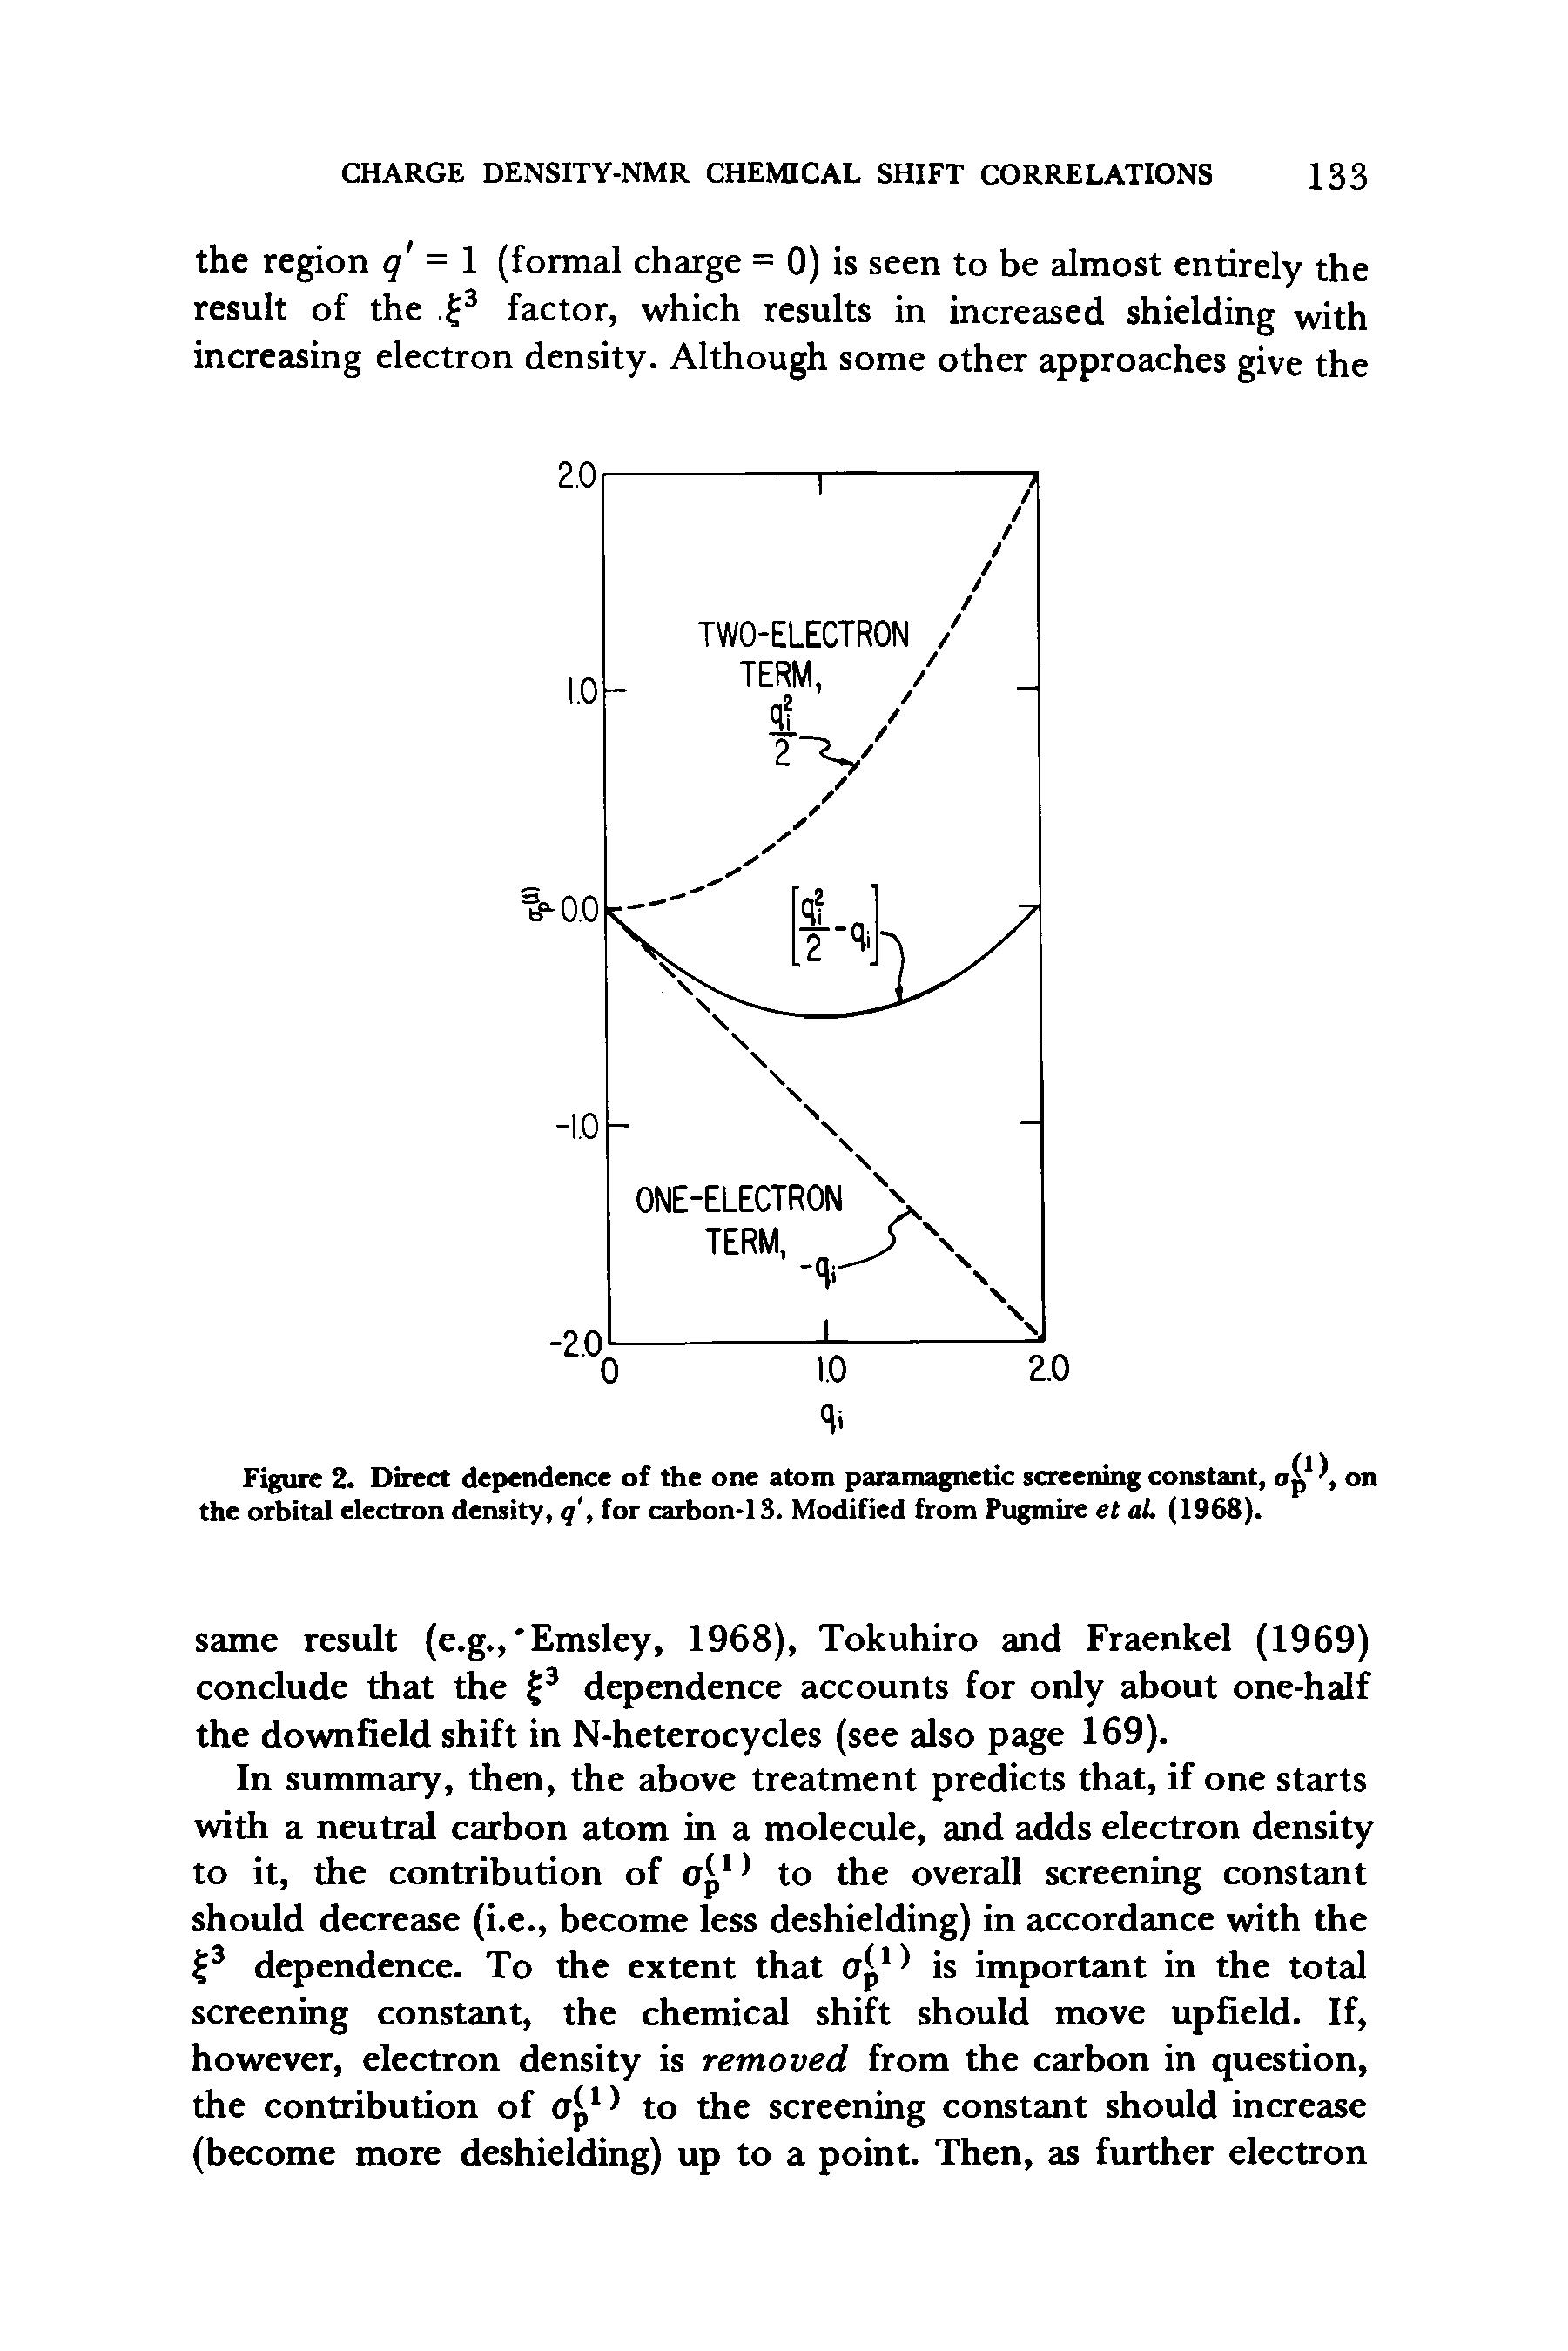 Figure 2. Direct dependence of the one atom paramagnetic screening constant, on the orbital electron density, q, for carbon-13. Modified from Pugmire et aL (1968).